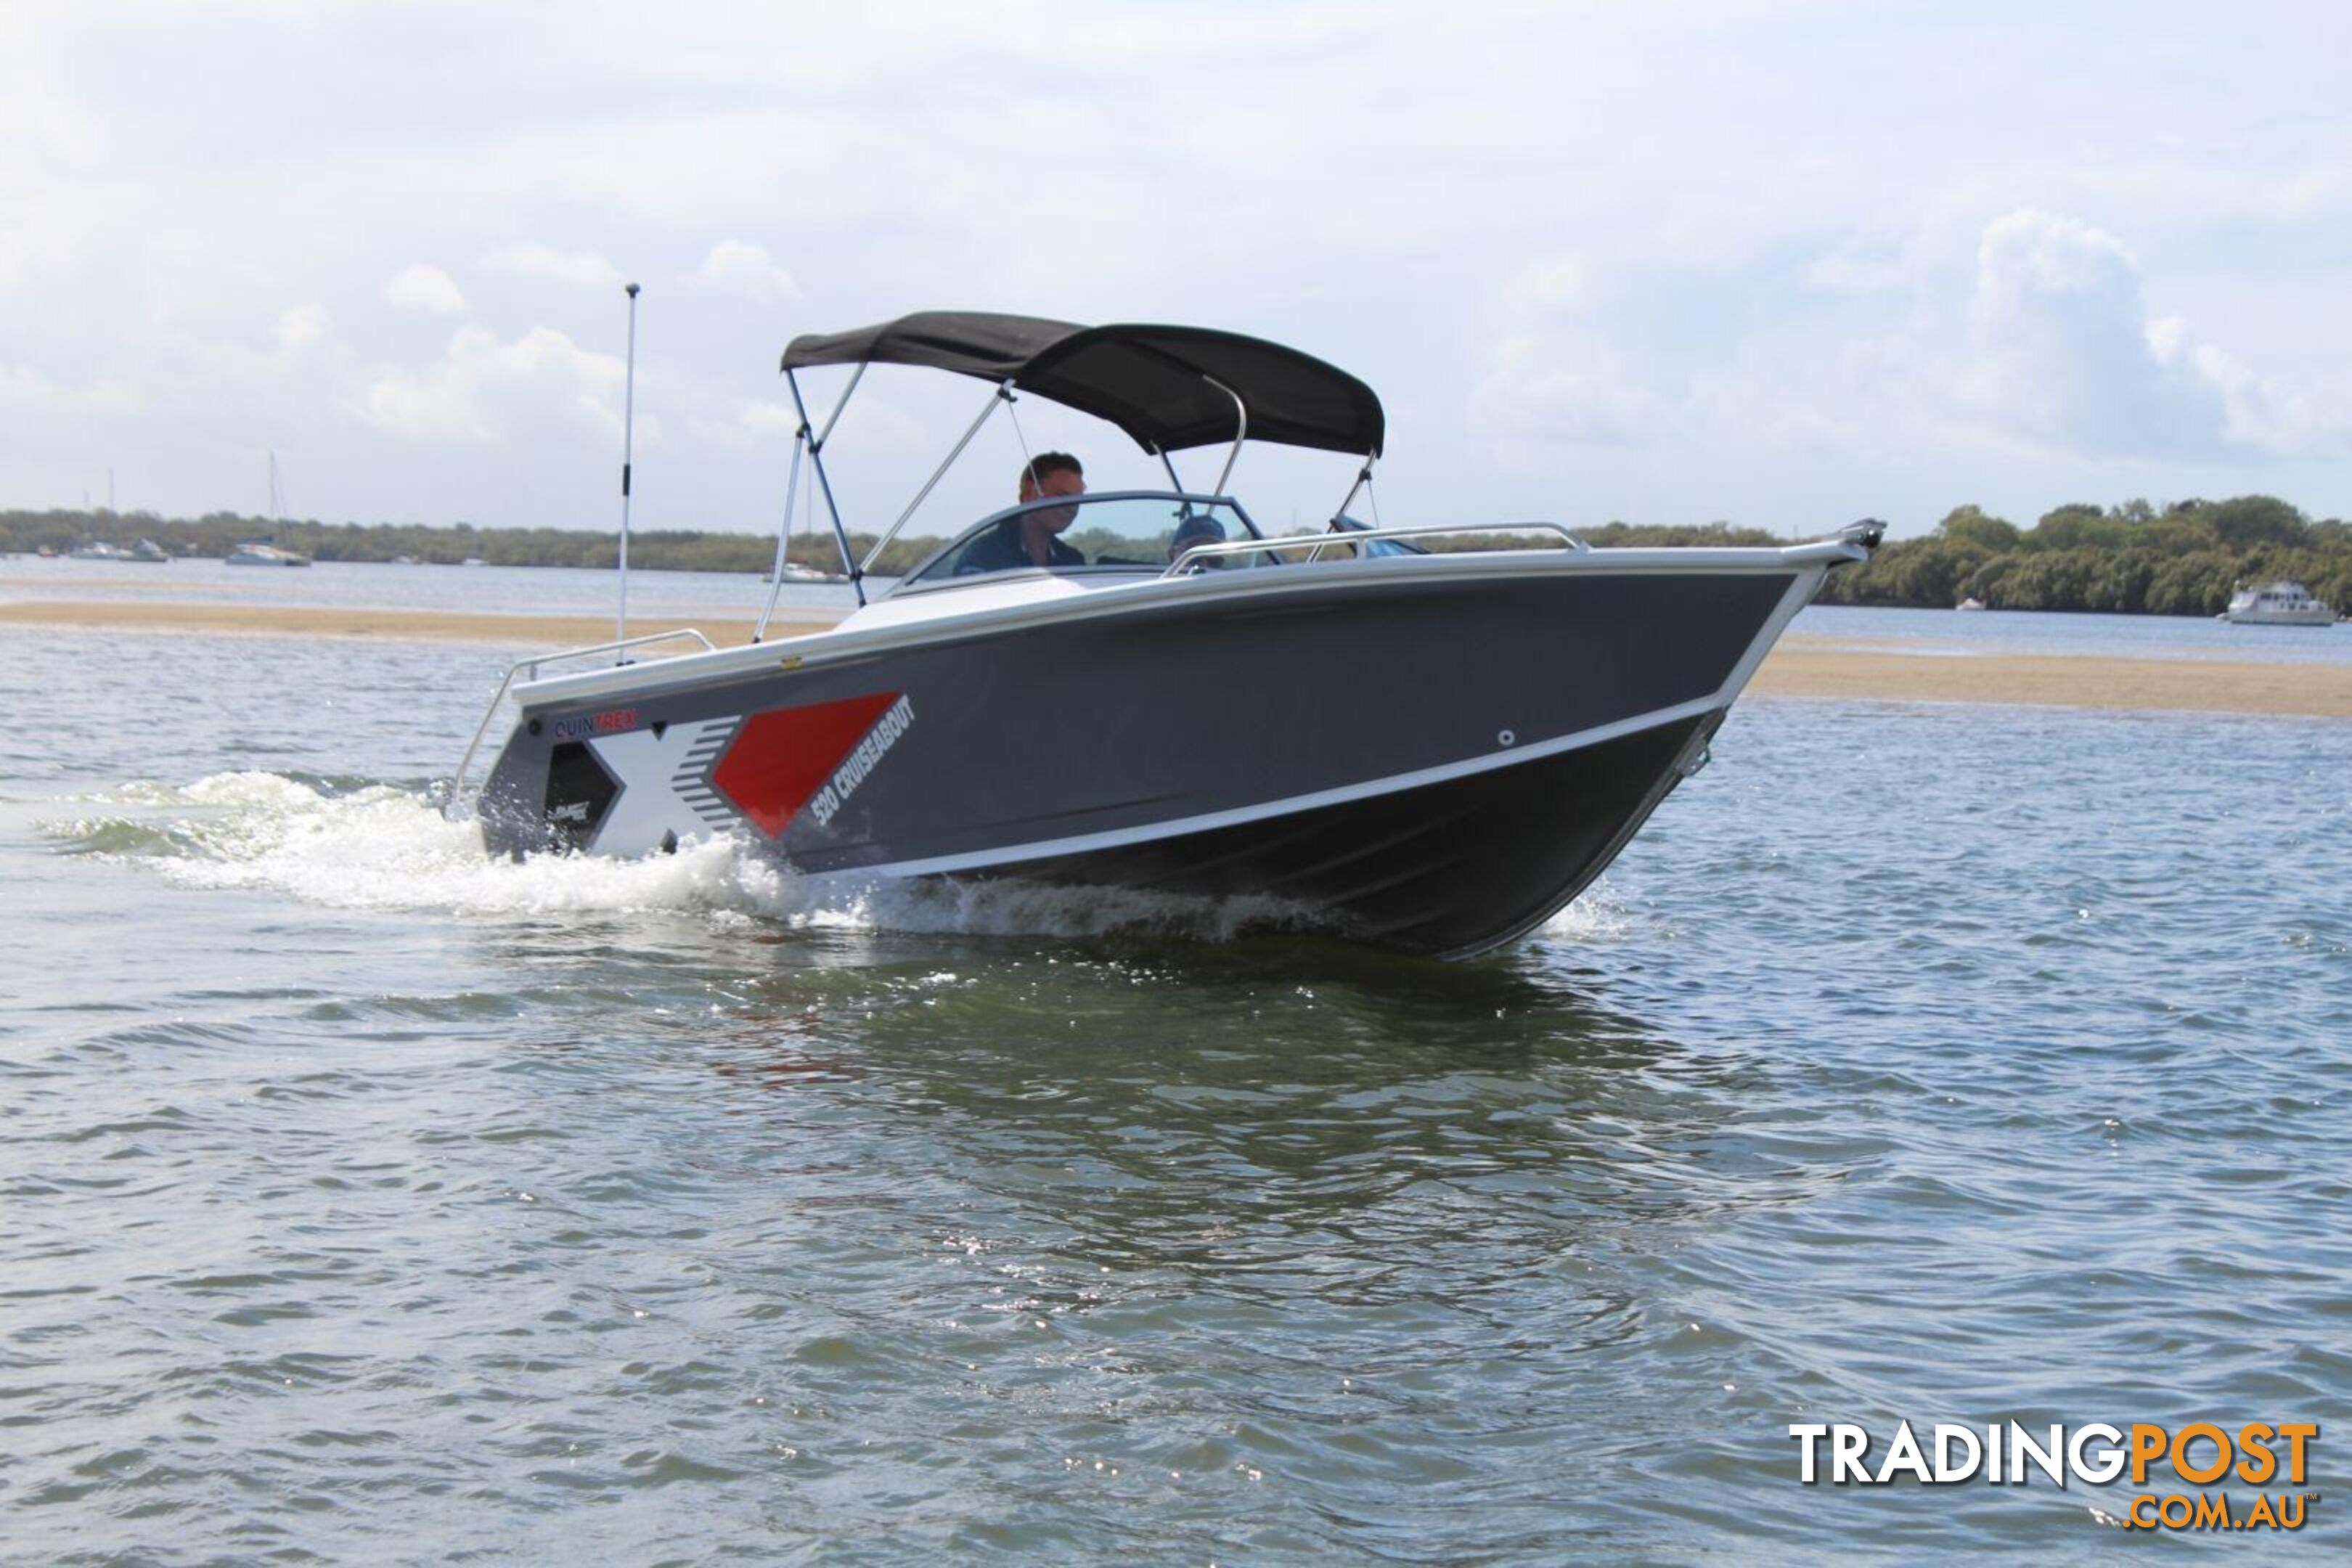 Quintrex 520 Cuiseabout + Yamaha F115hp 4-Stroke - Pack 3 for sale online prices